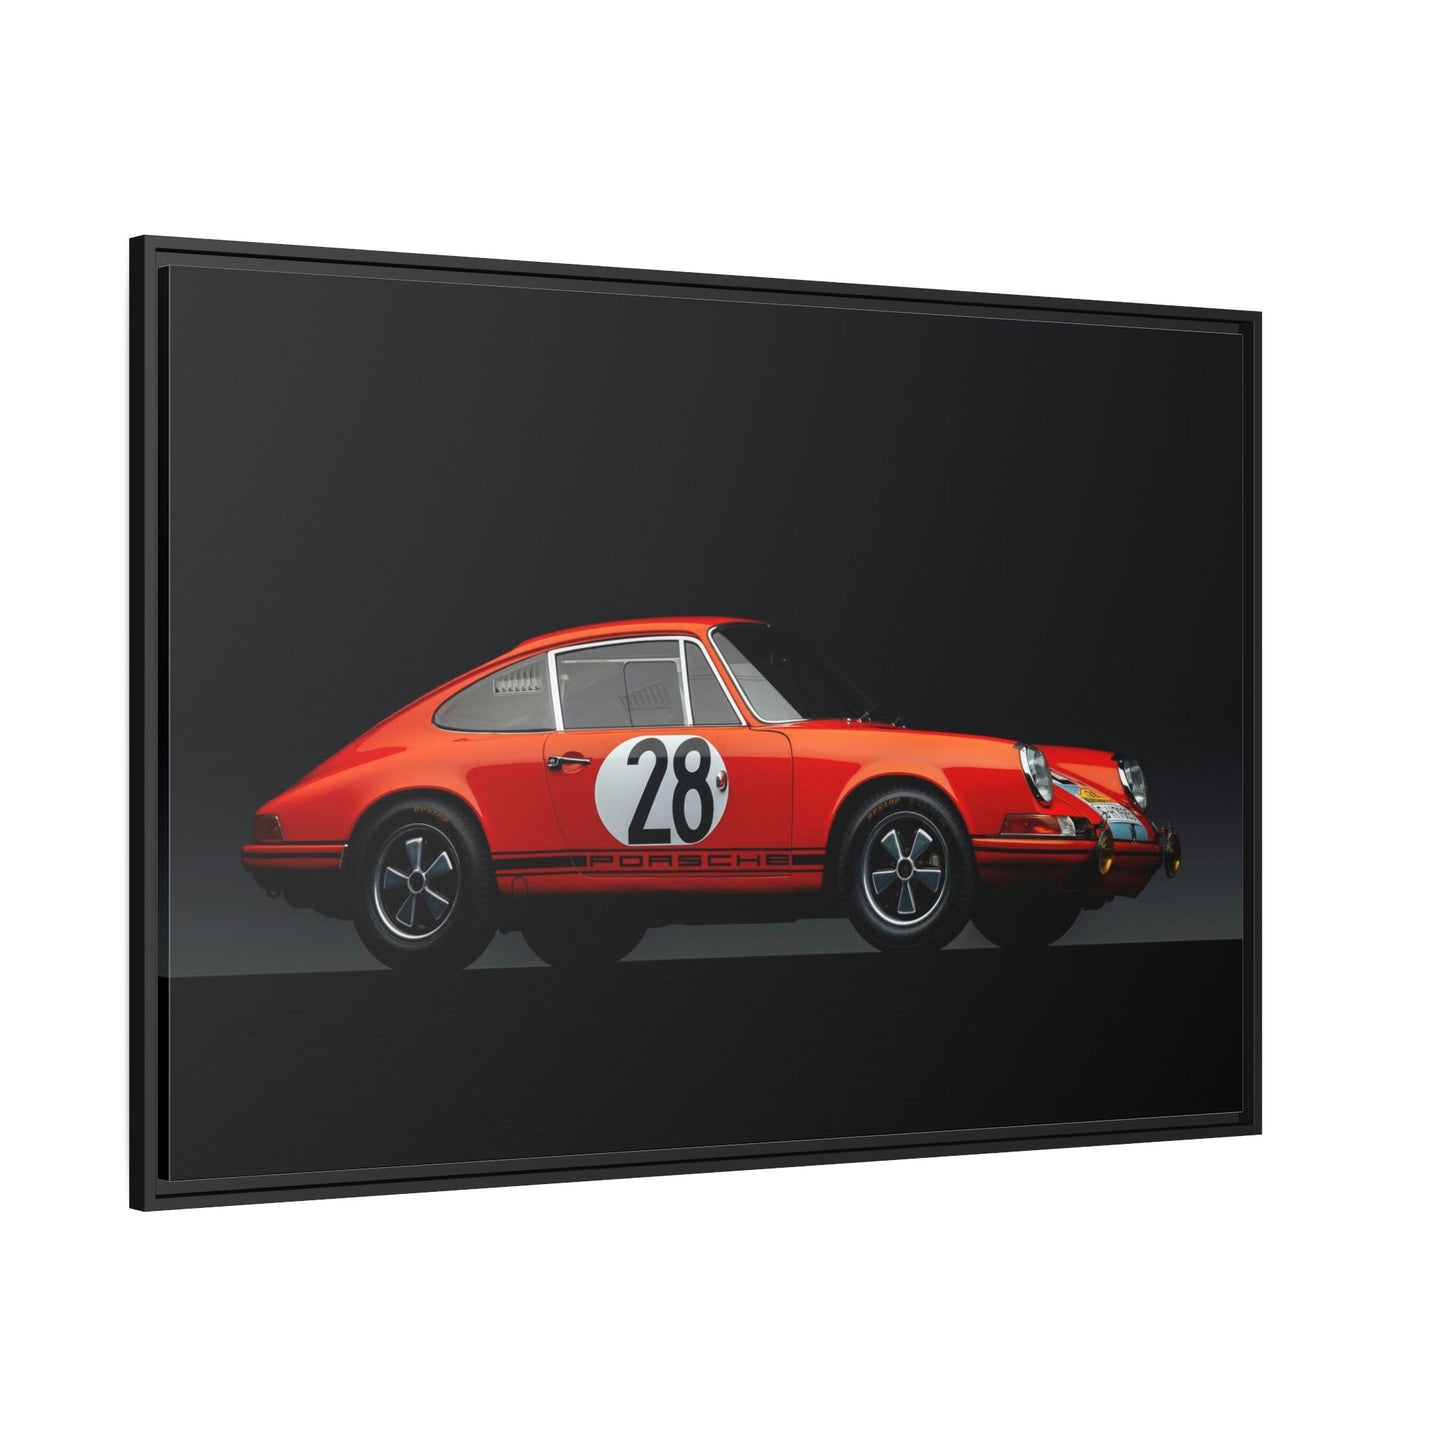 Iconic Porsche: A High-Quality Print on Canvas for Fans of Classic Cars